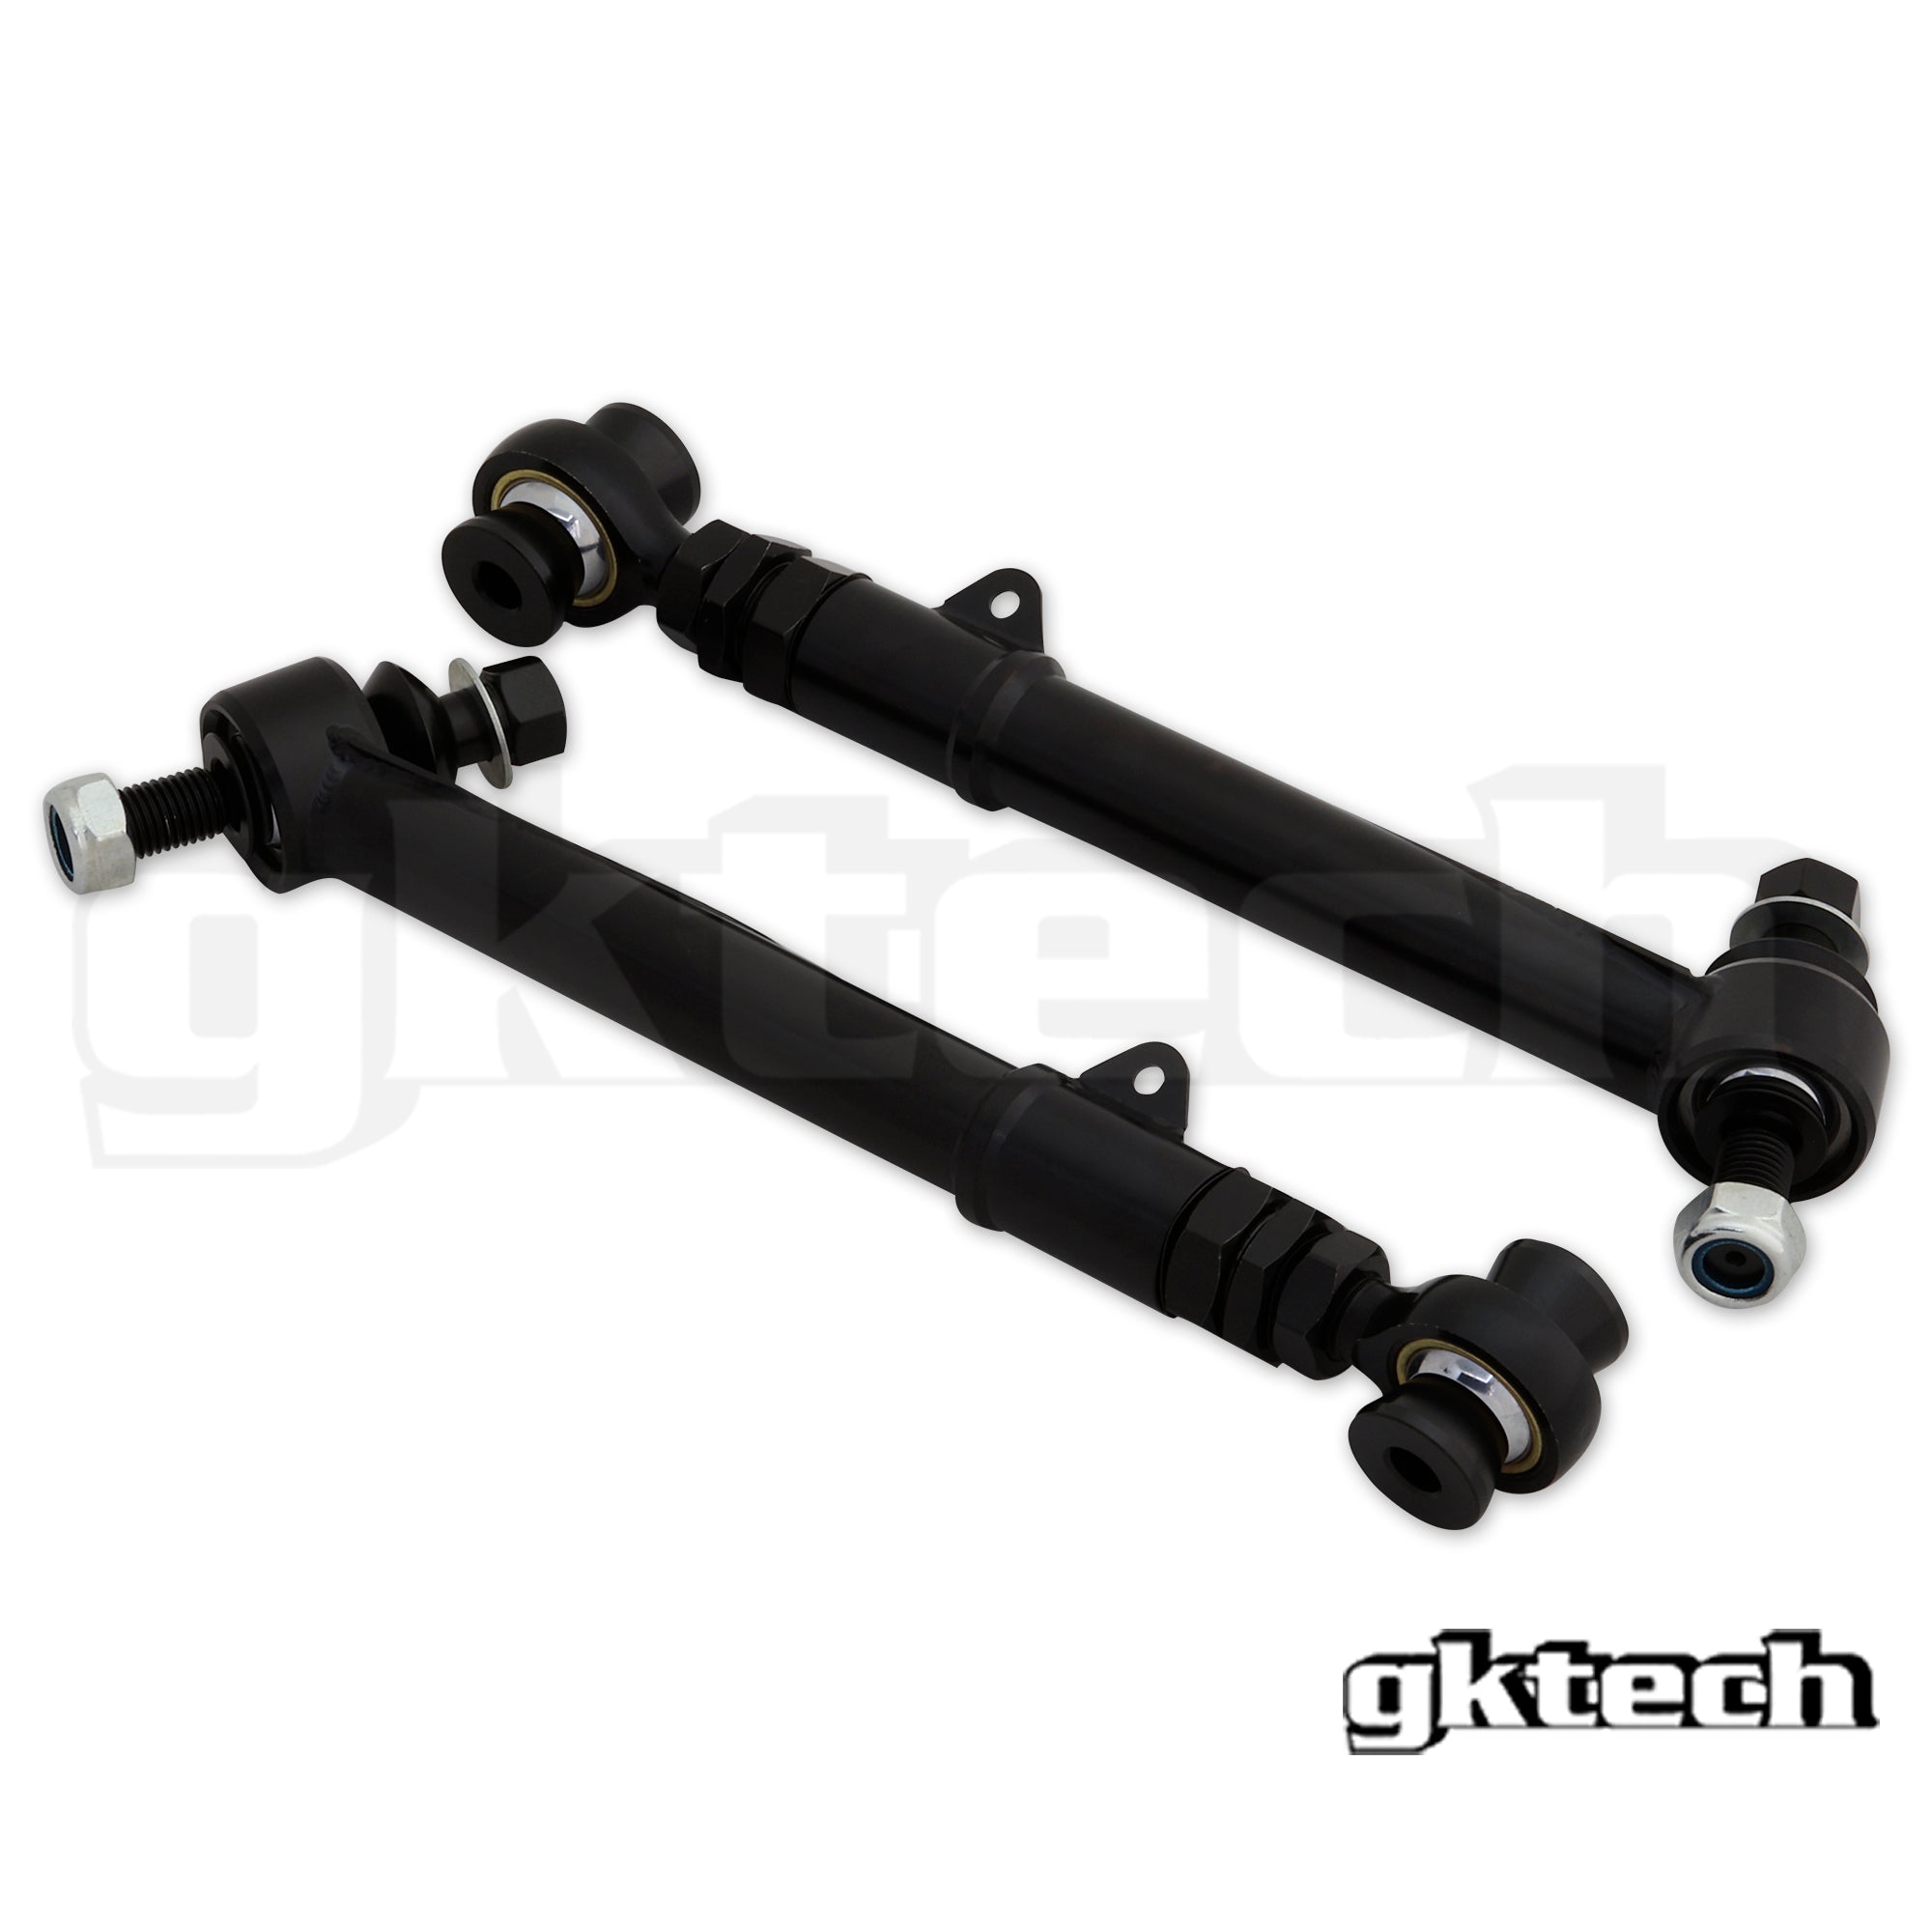 F8X M2/M3/M4 ADJUSTABLE FRONT LOWER TRAILING ARMS (PAIR)